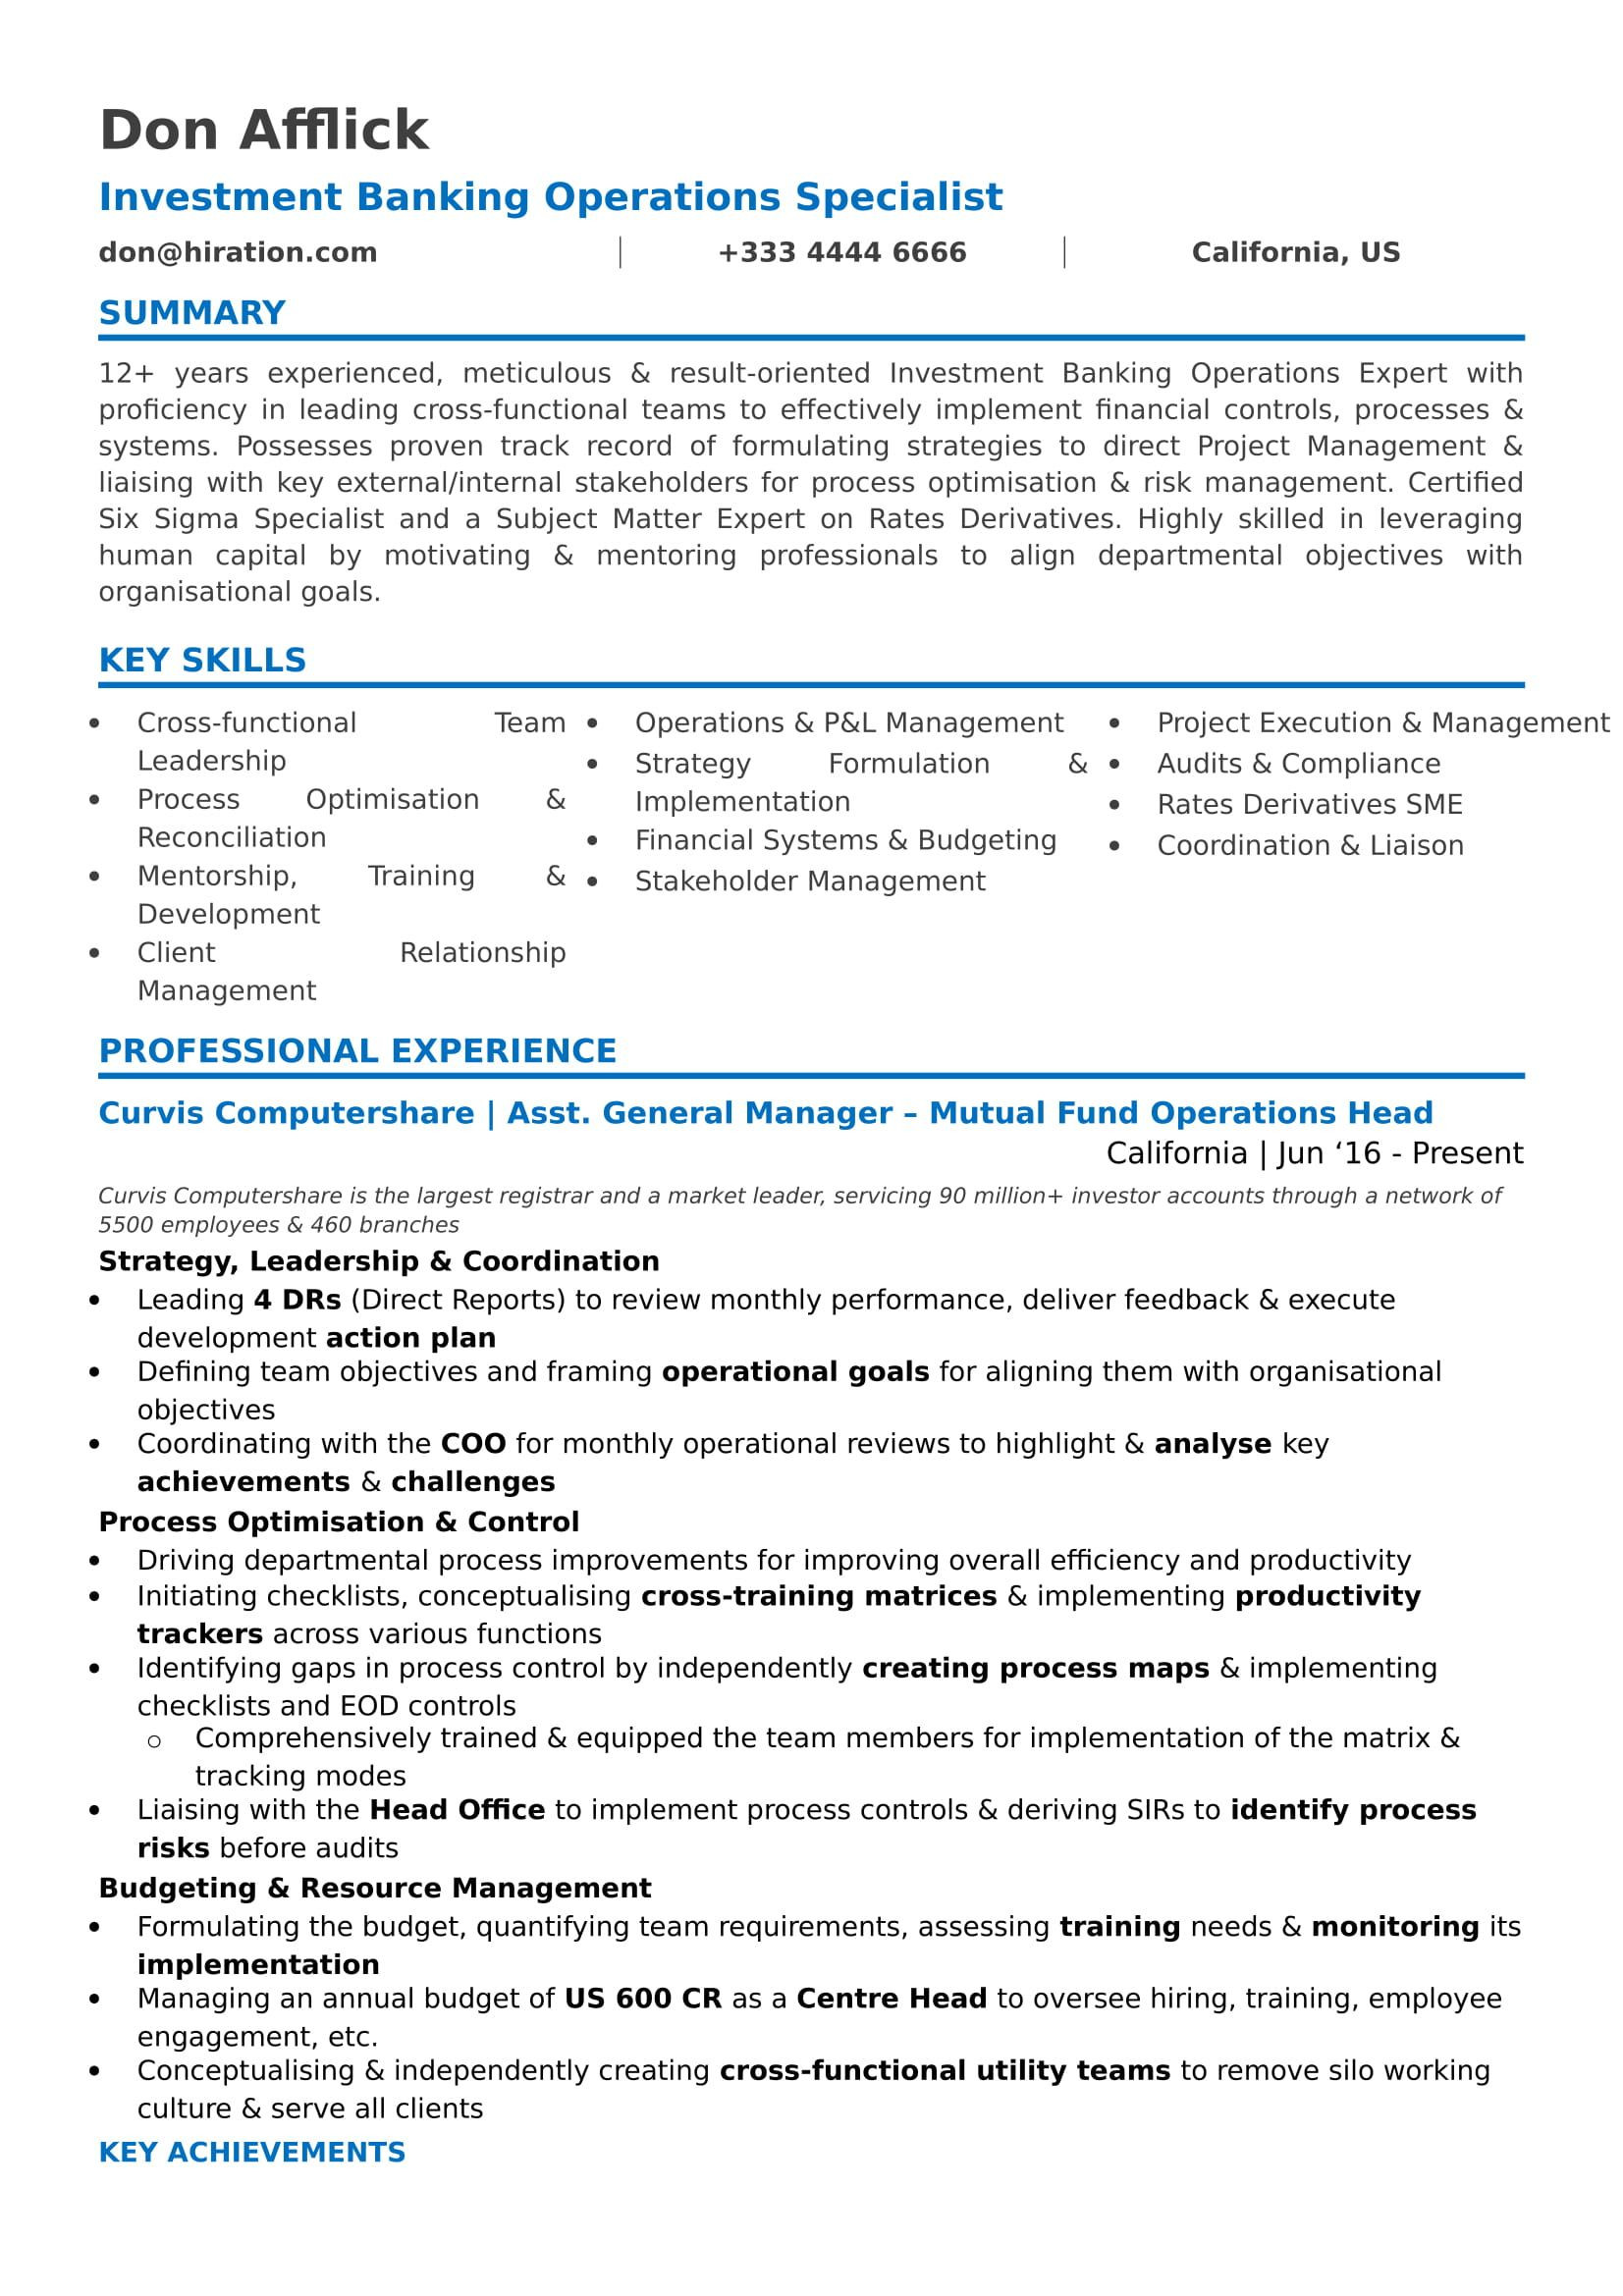 Samples Of Objectives In Resume About Change In Career Path Career Change Resume: 2022 Guide to Resume for Career Change